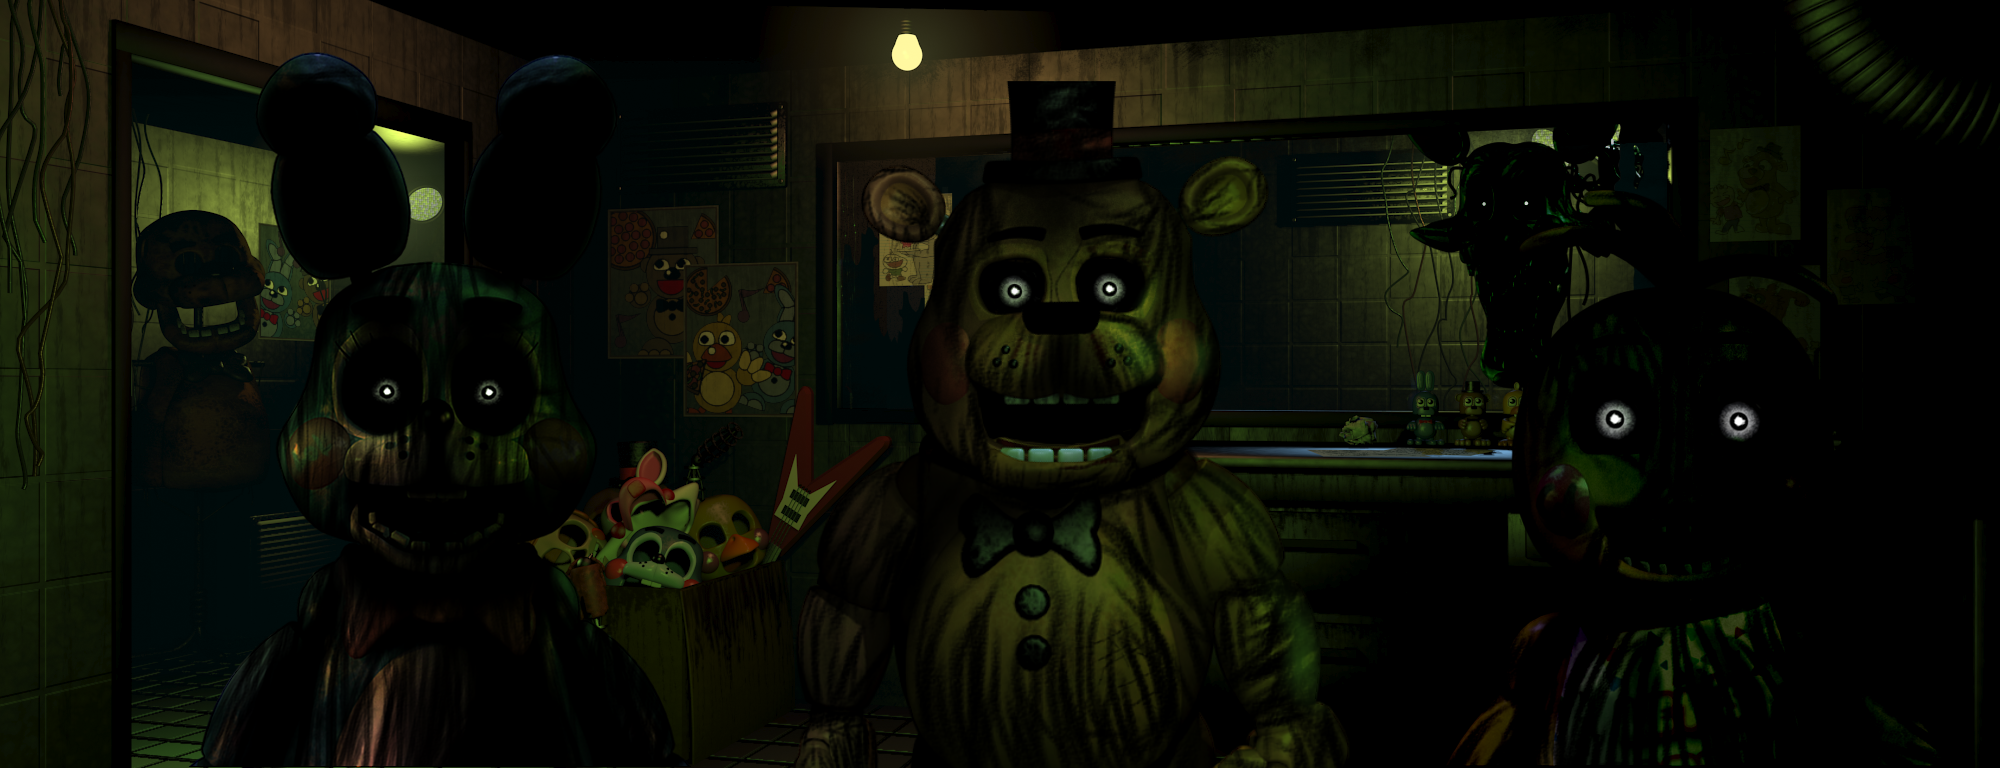 Five Nights At Freddy S By Christian2099